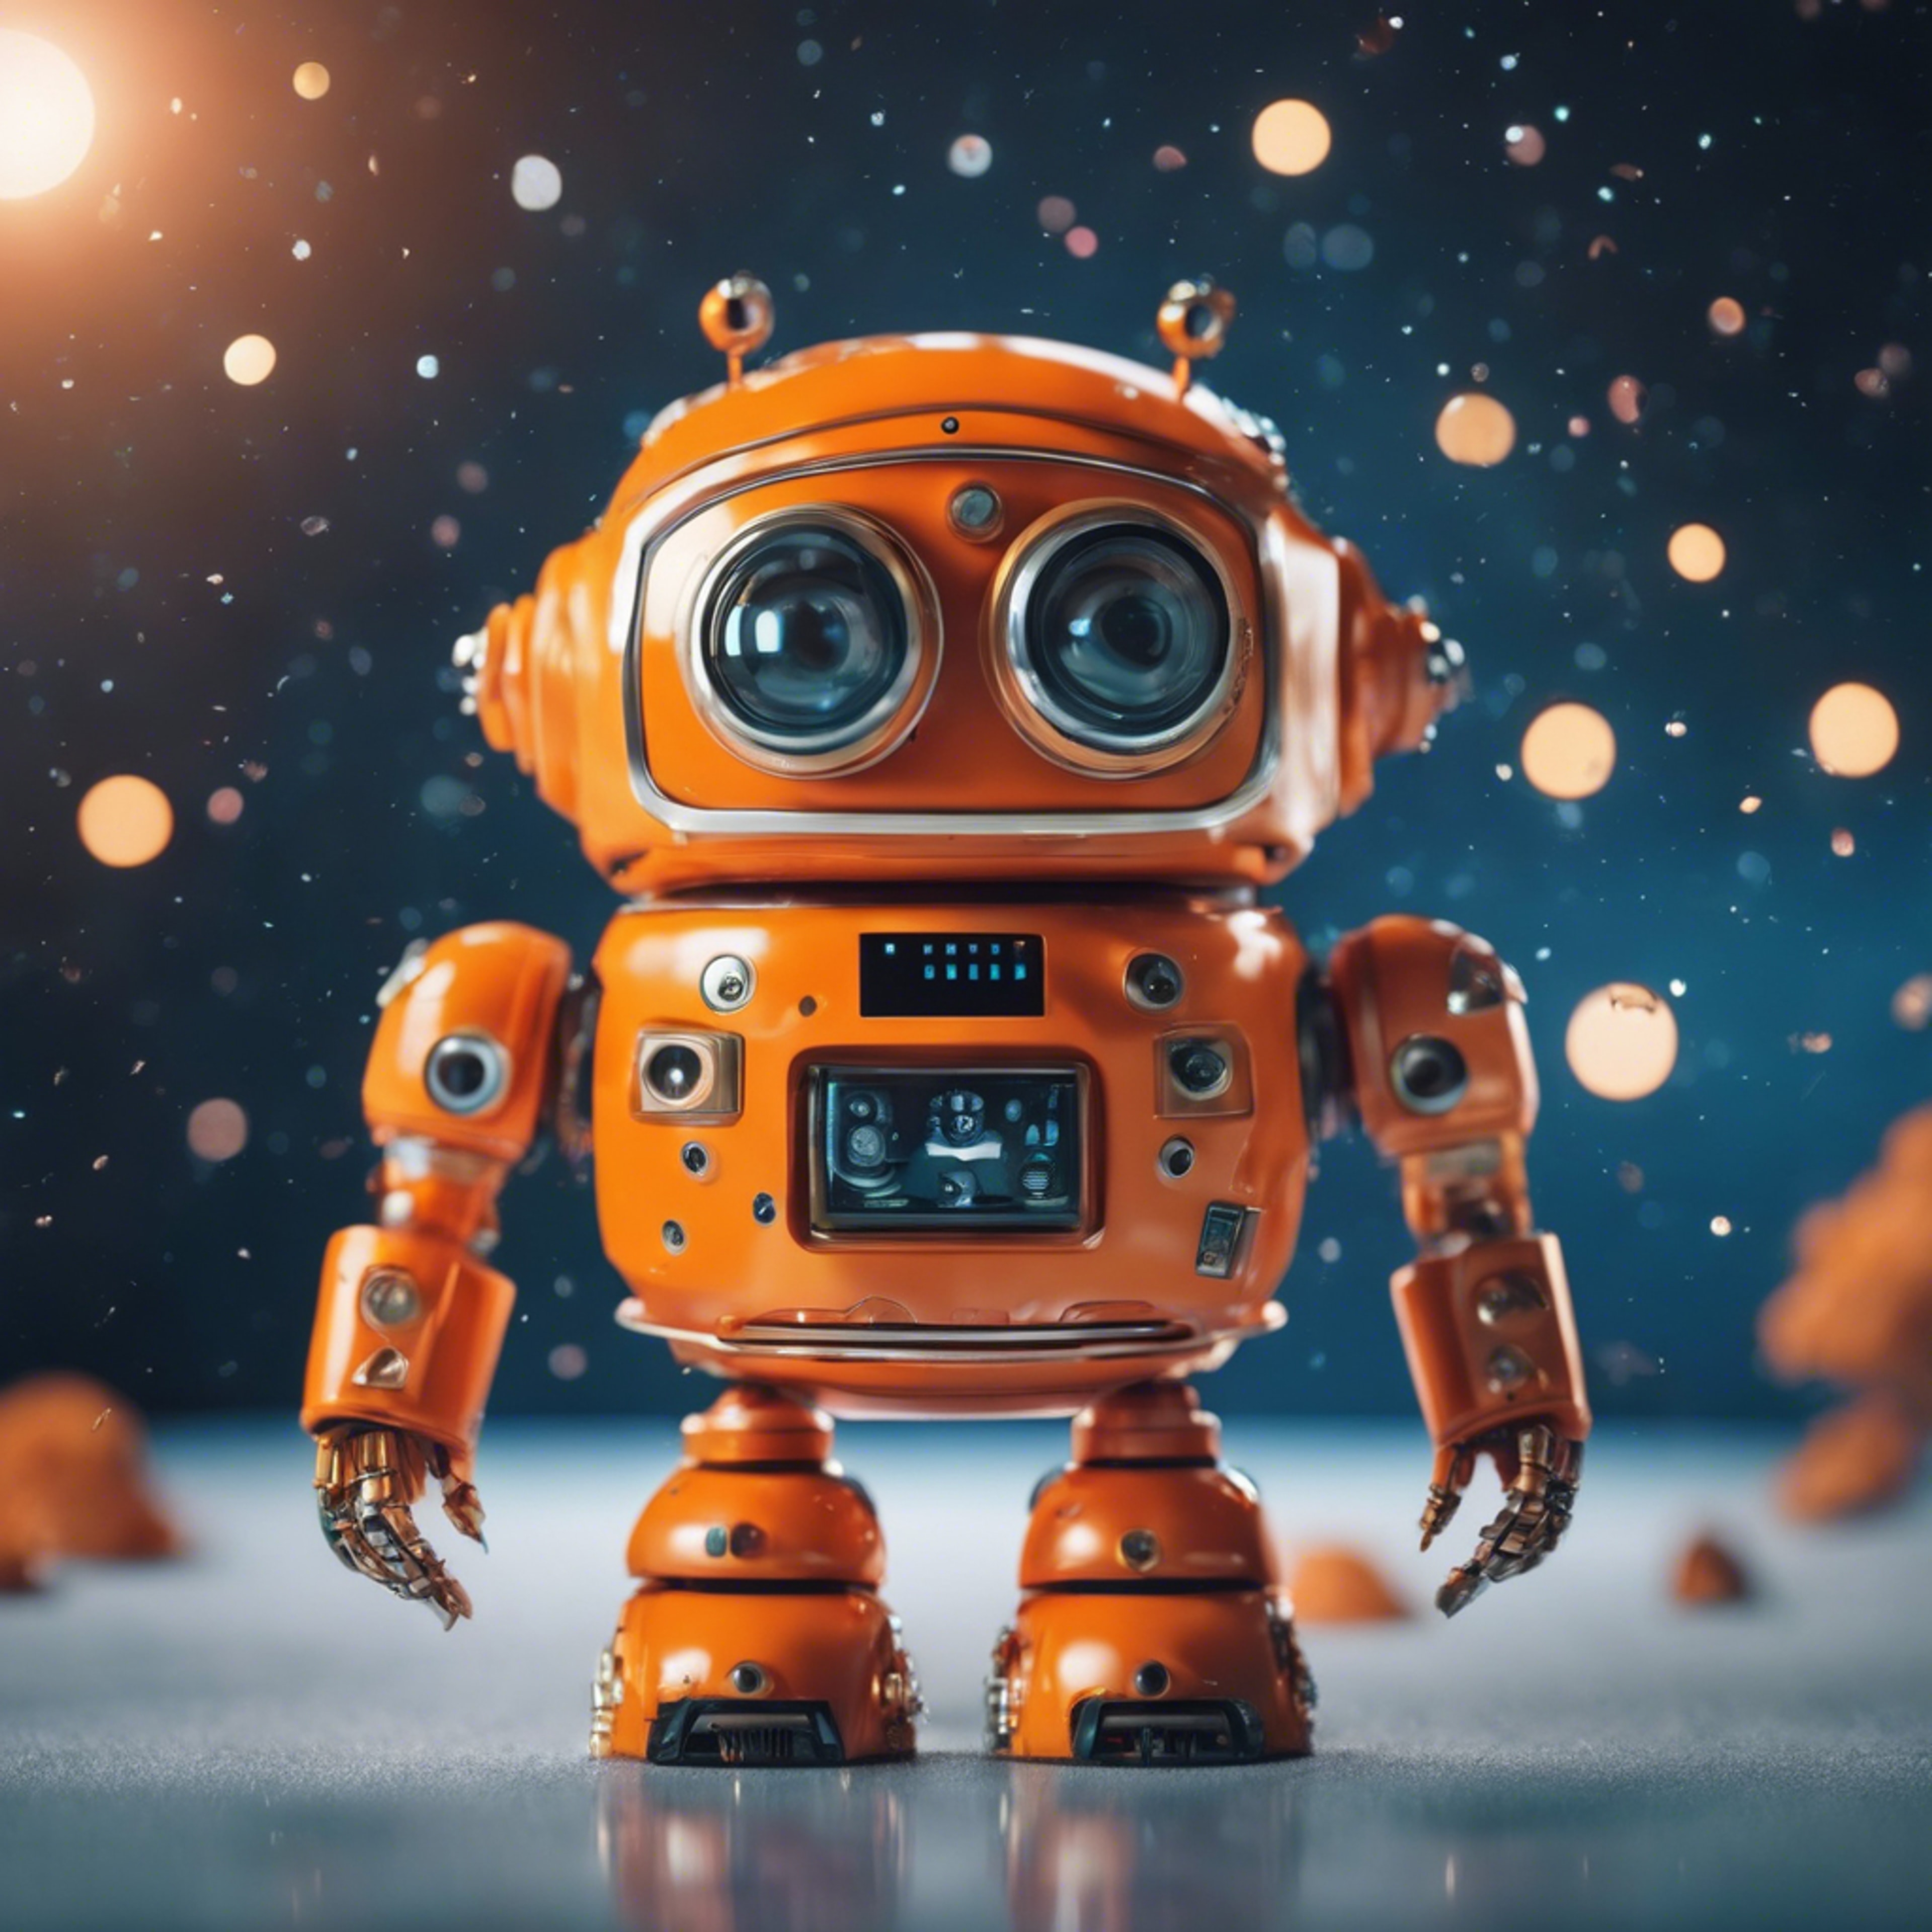 An orange robot with kawaii eyes, floating in outer space. Wallpaper[246f36edcee94202ab79]